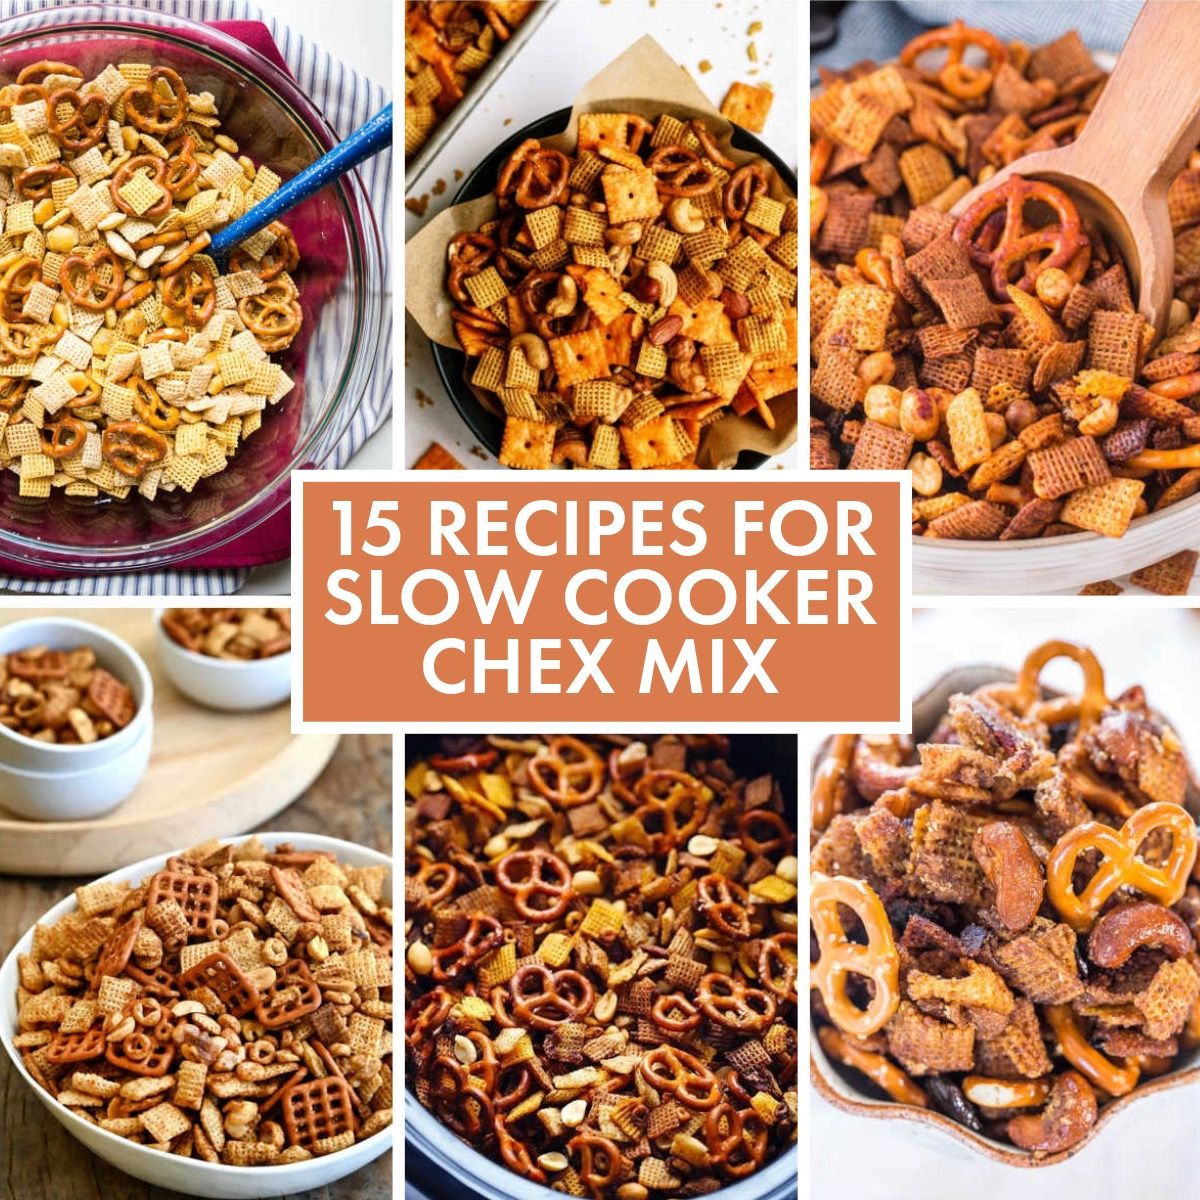 15 Recipes for Slow Cooker Chex Mix collage with text overlay, showing featured recipes.